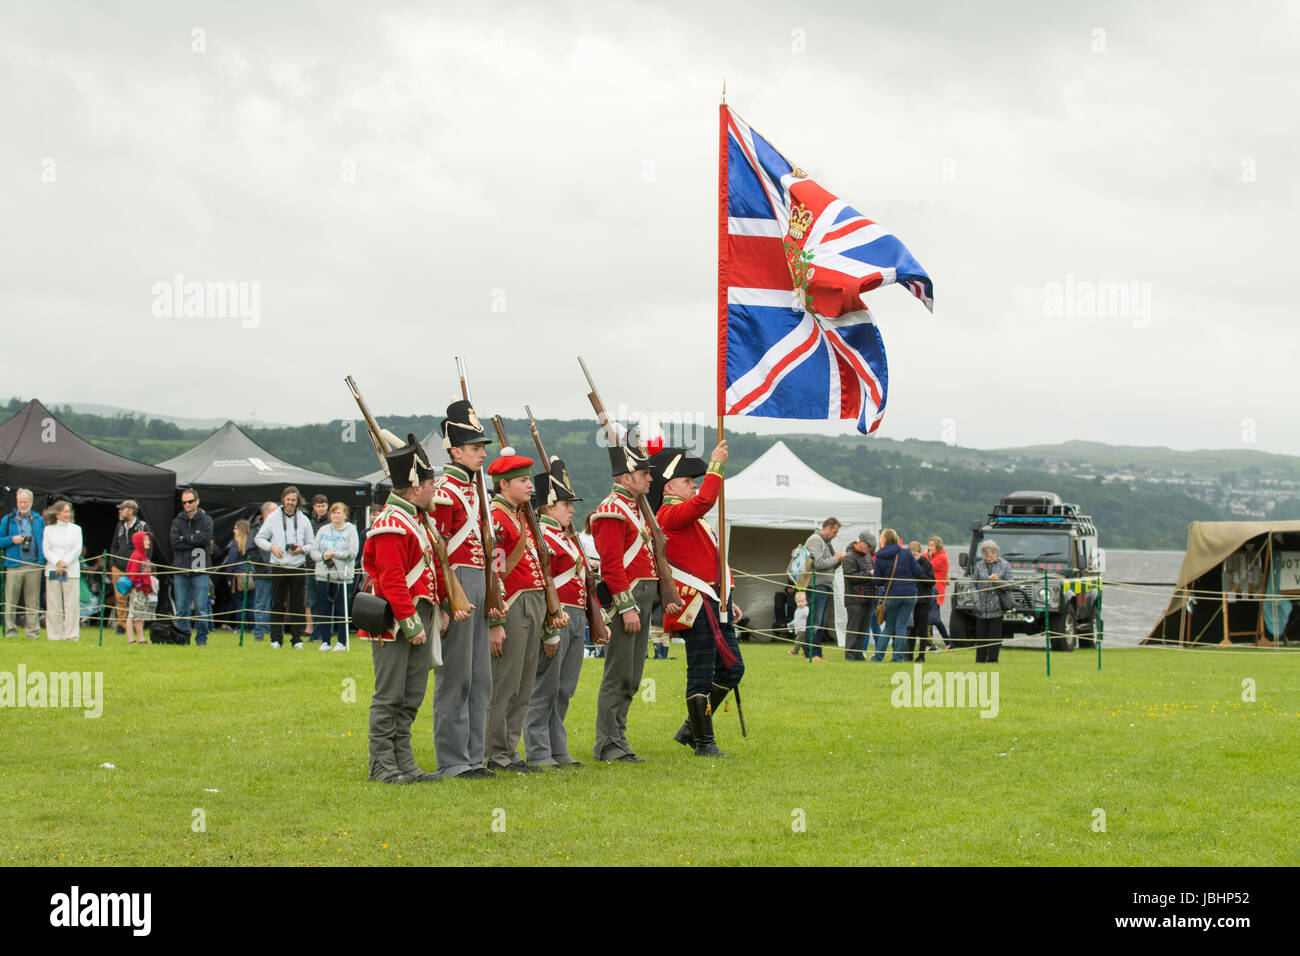 Dumbarton, West Dunbartonshire, Scotland, UK - 11 June 2017: UK weather - a Napoleonic soldier controlling a very large flag during Rock of Ages - a two day costume celebration of Scotland's history through the ages at Dumbarton Castle on a day of sunshine, gusty winds and showers Credit: Kay Roxby/Alamy Live News Stock Photo